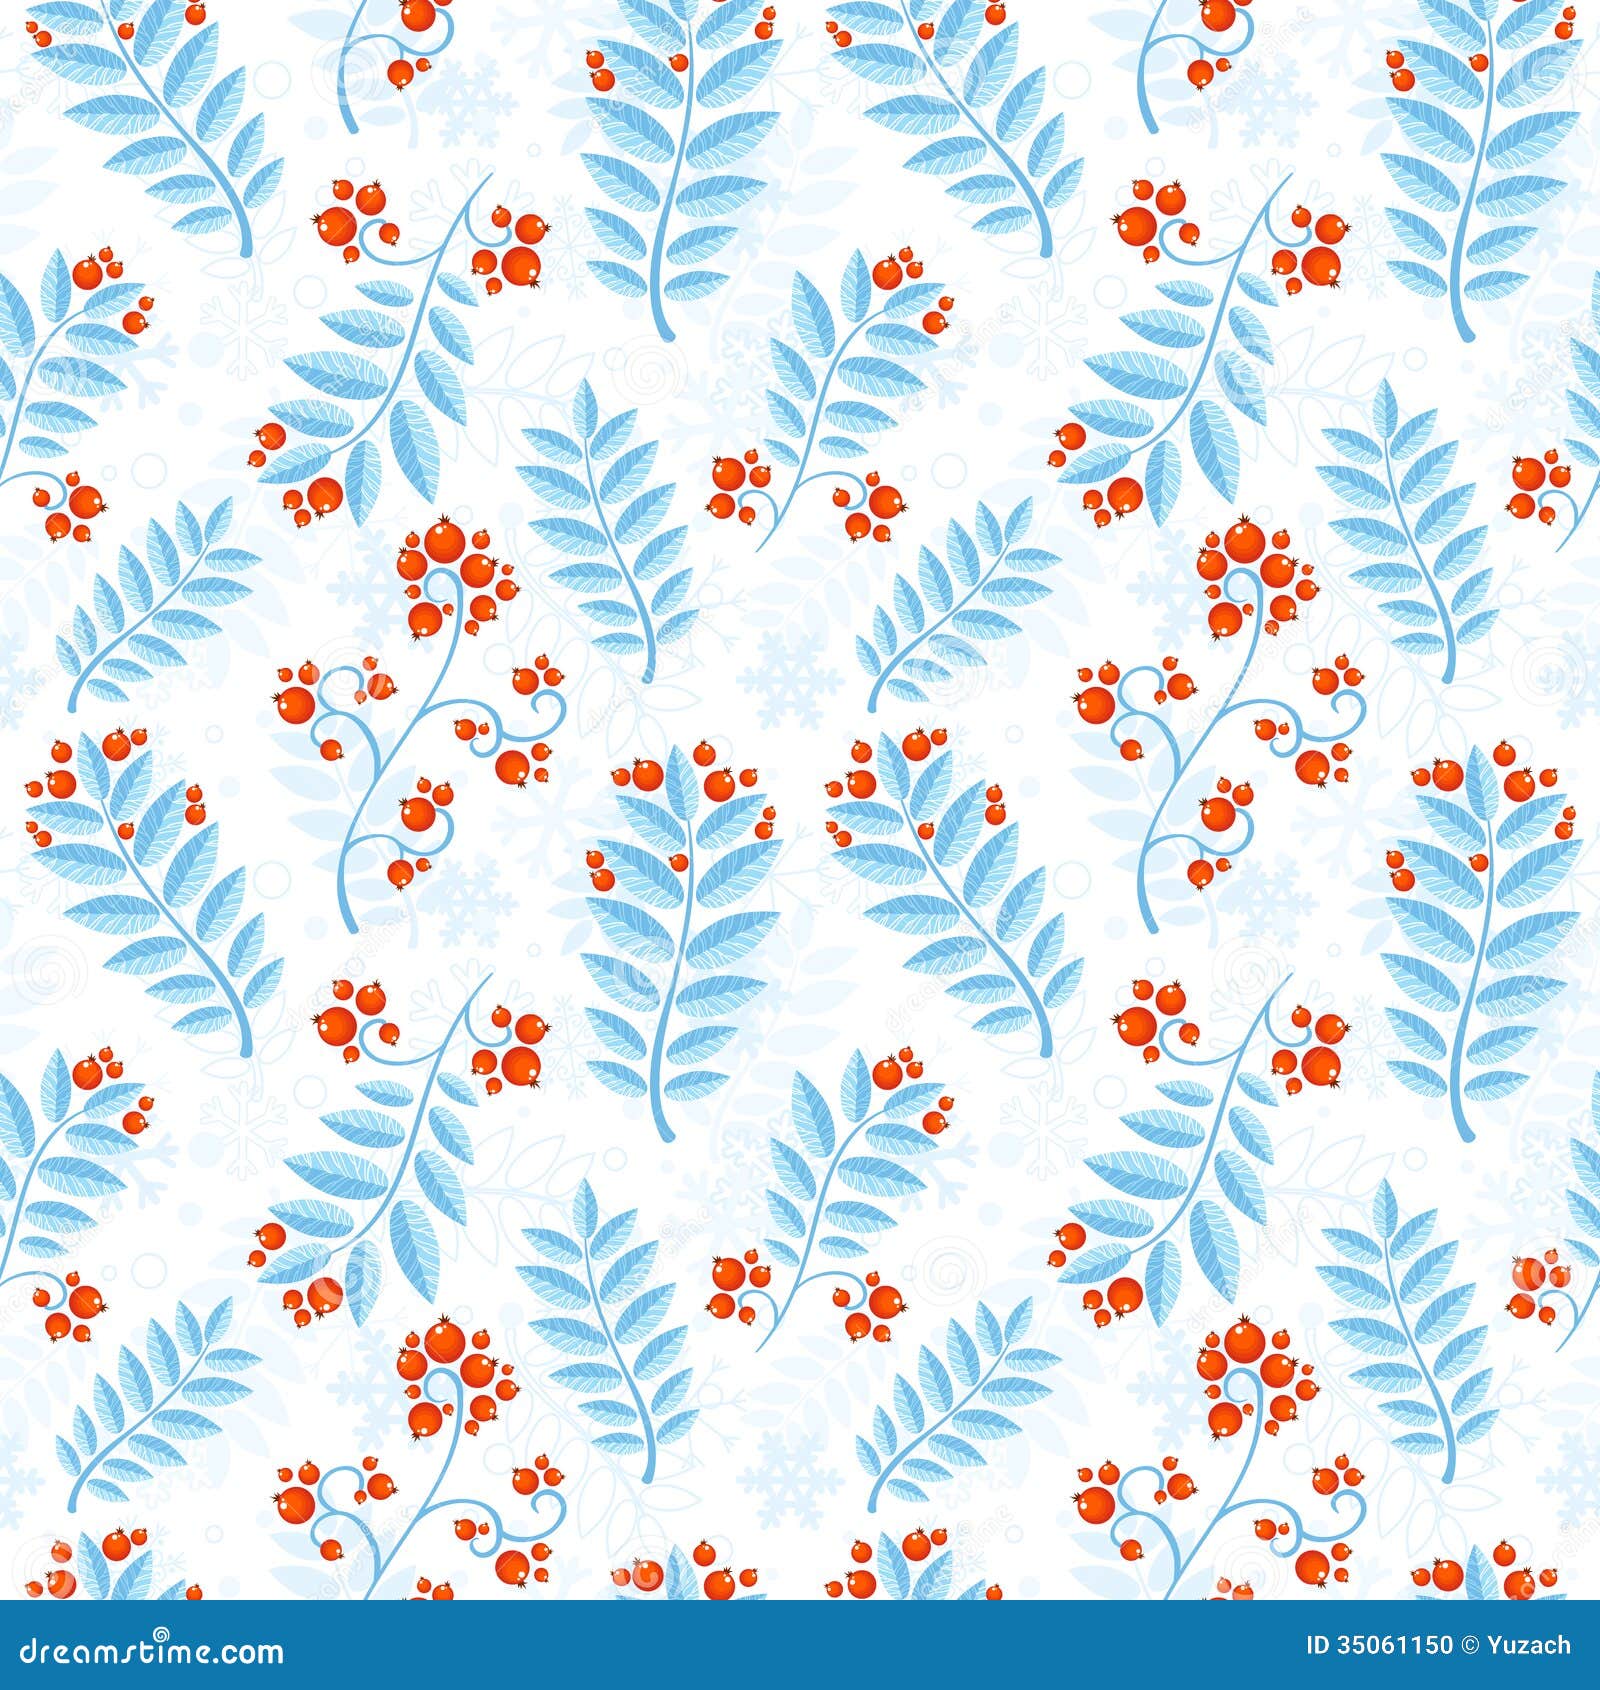 Floral Seamless Pattern With Winter Ash Berry Stock Photo 